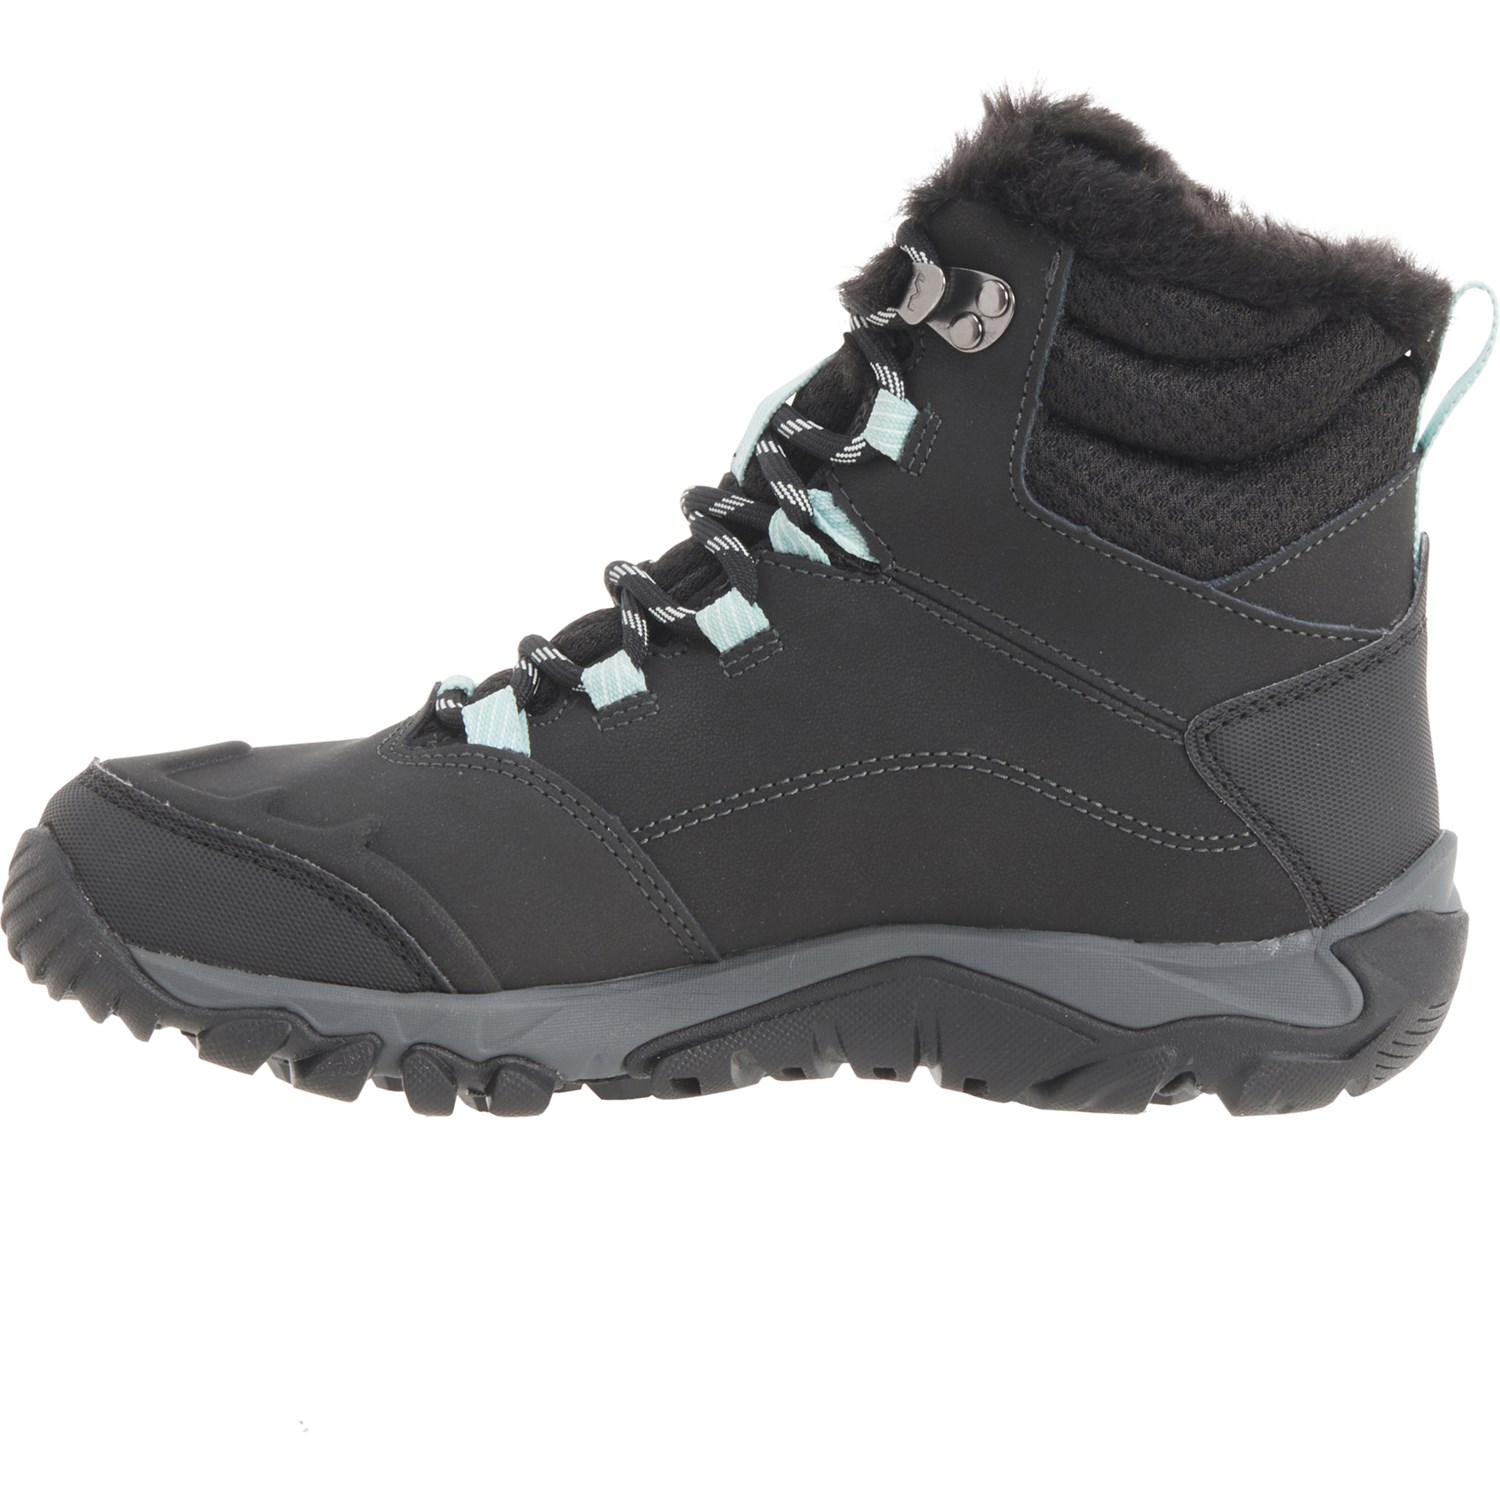 Merrell Thermo Fractal Mid Pac Boots (For Women) - Save 33%